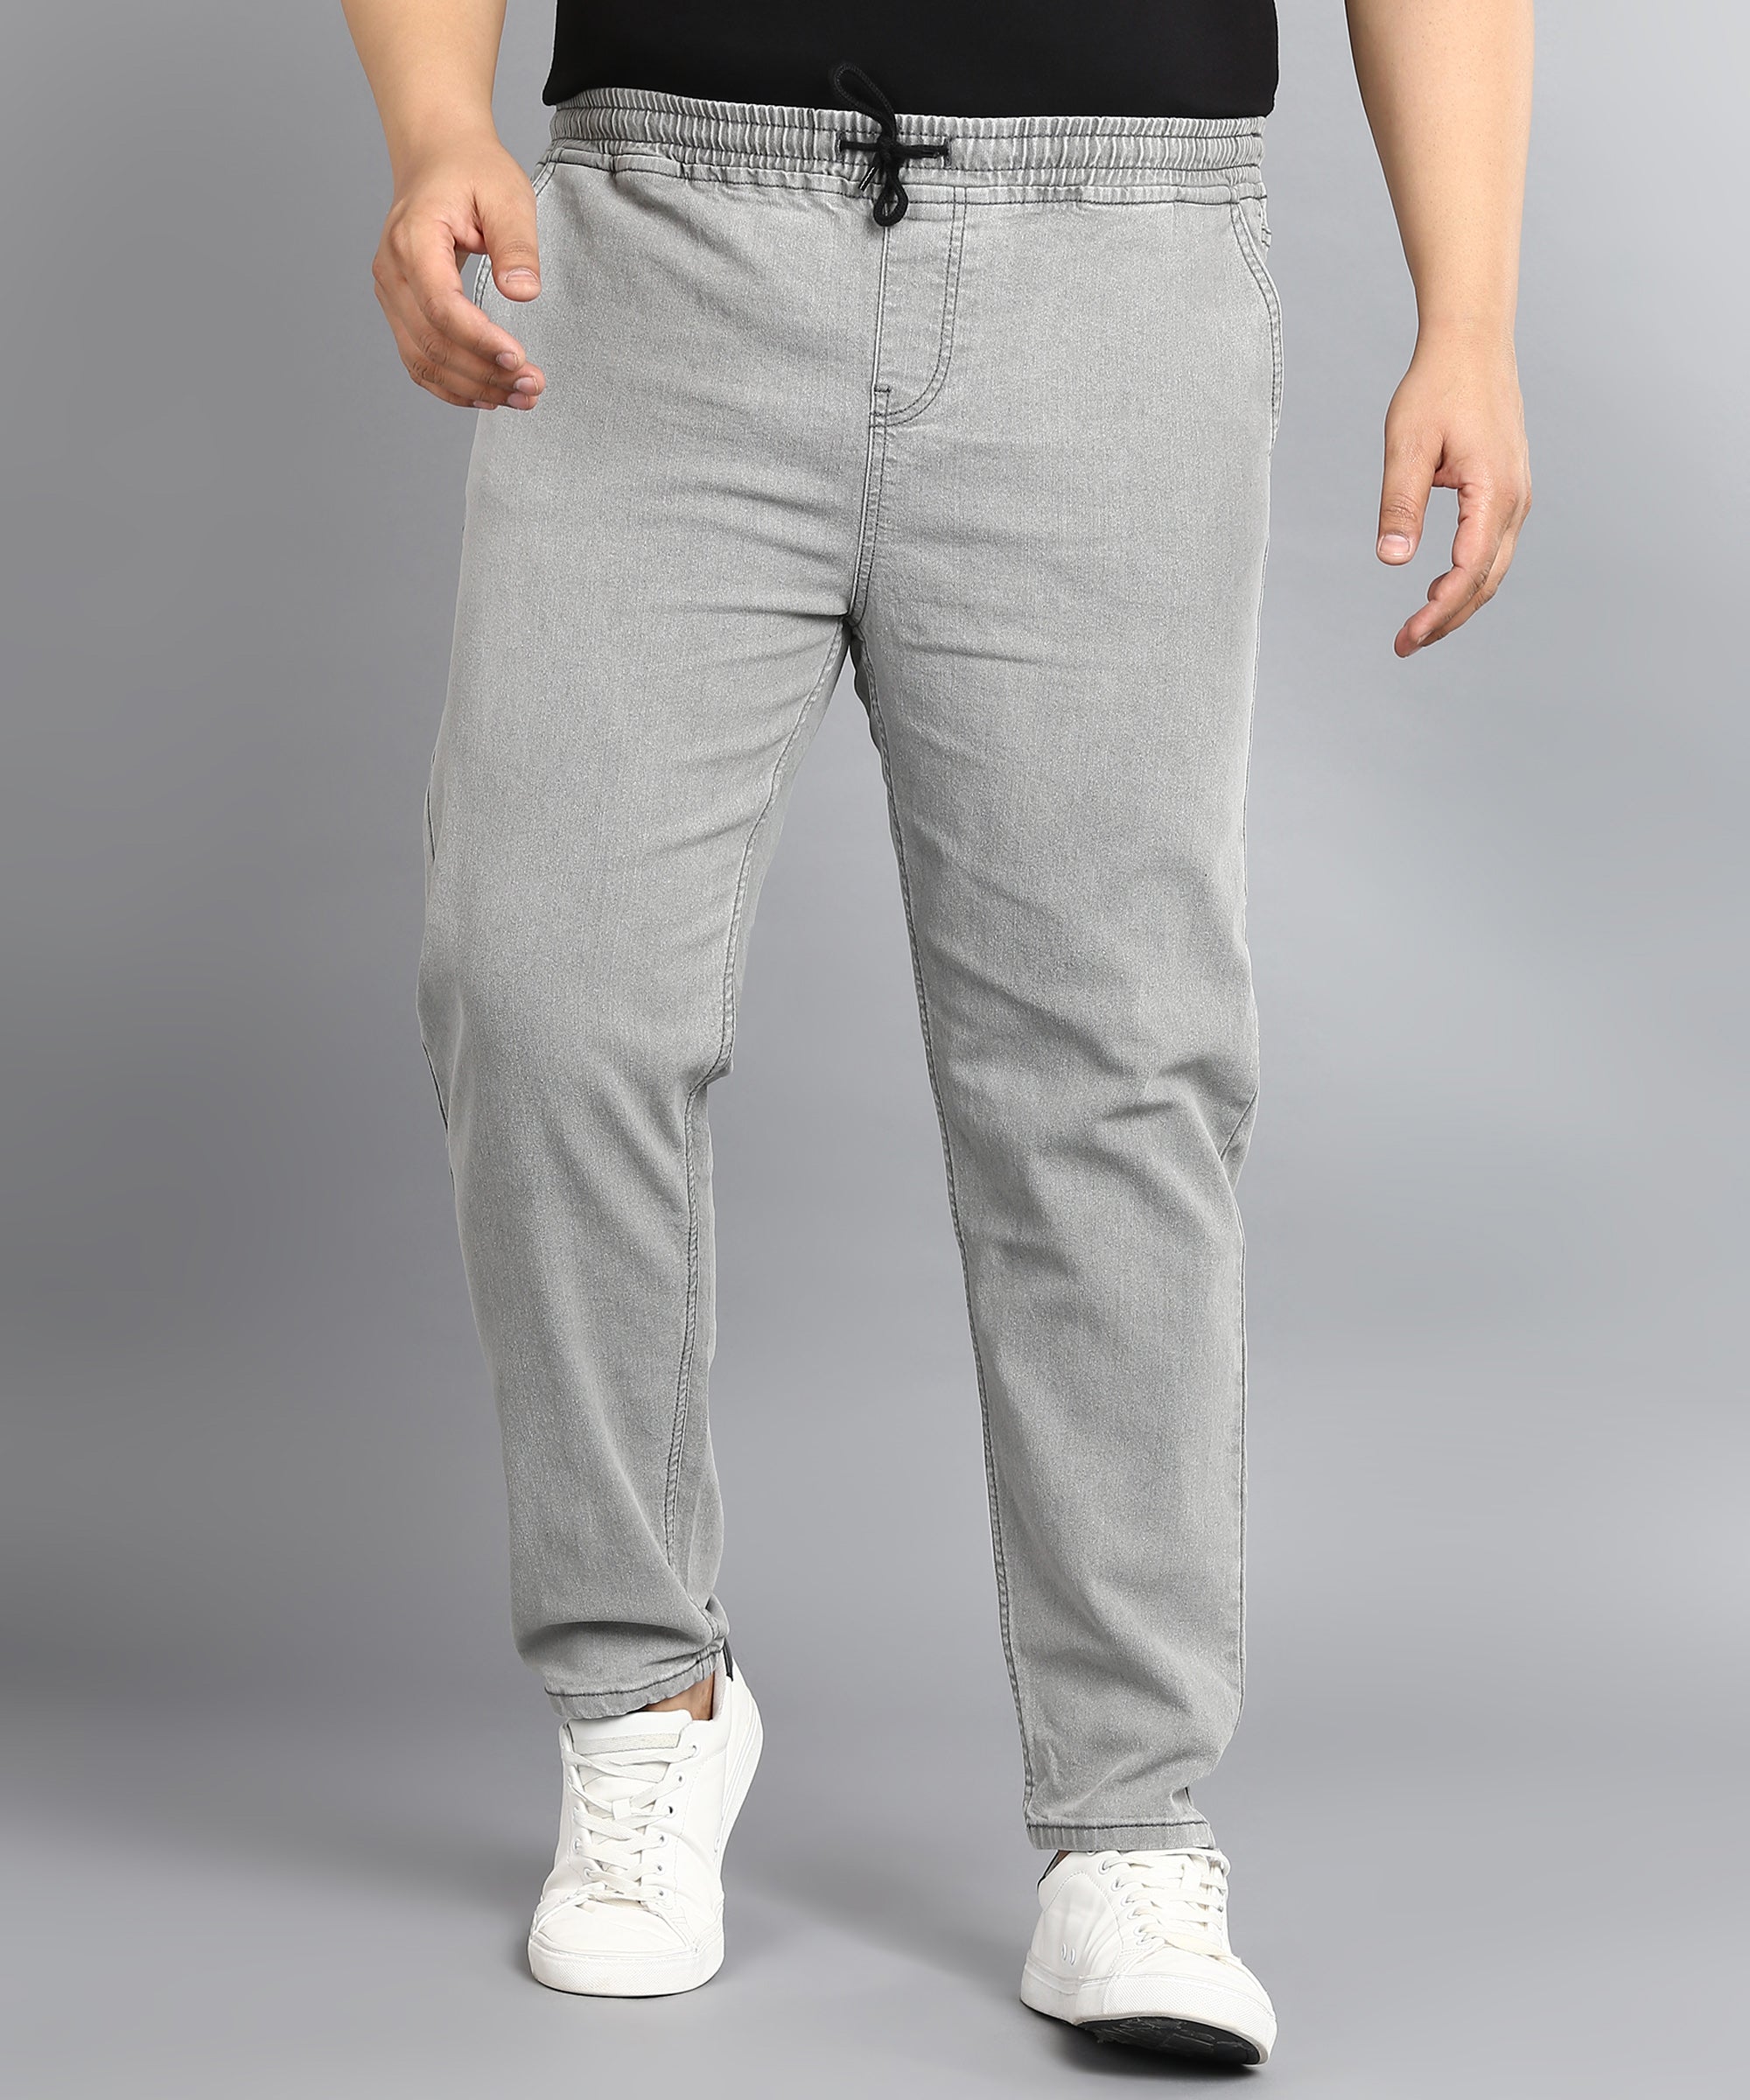 Urbano Plus Men's Ice Grey Regular Fit Washed Jogger Jeans Stretchable